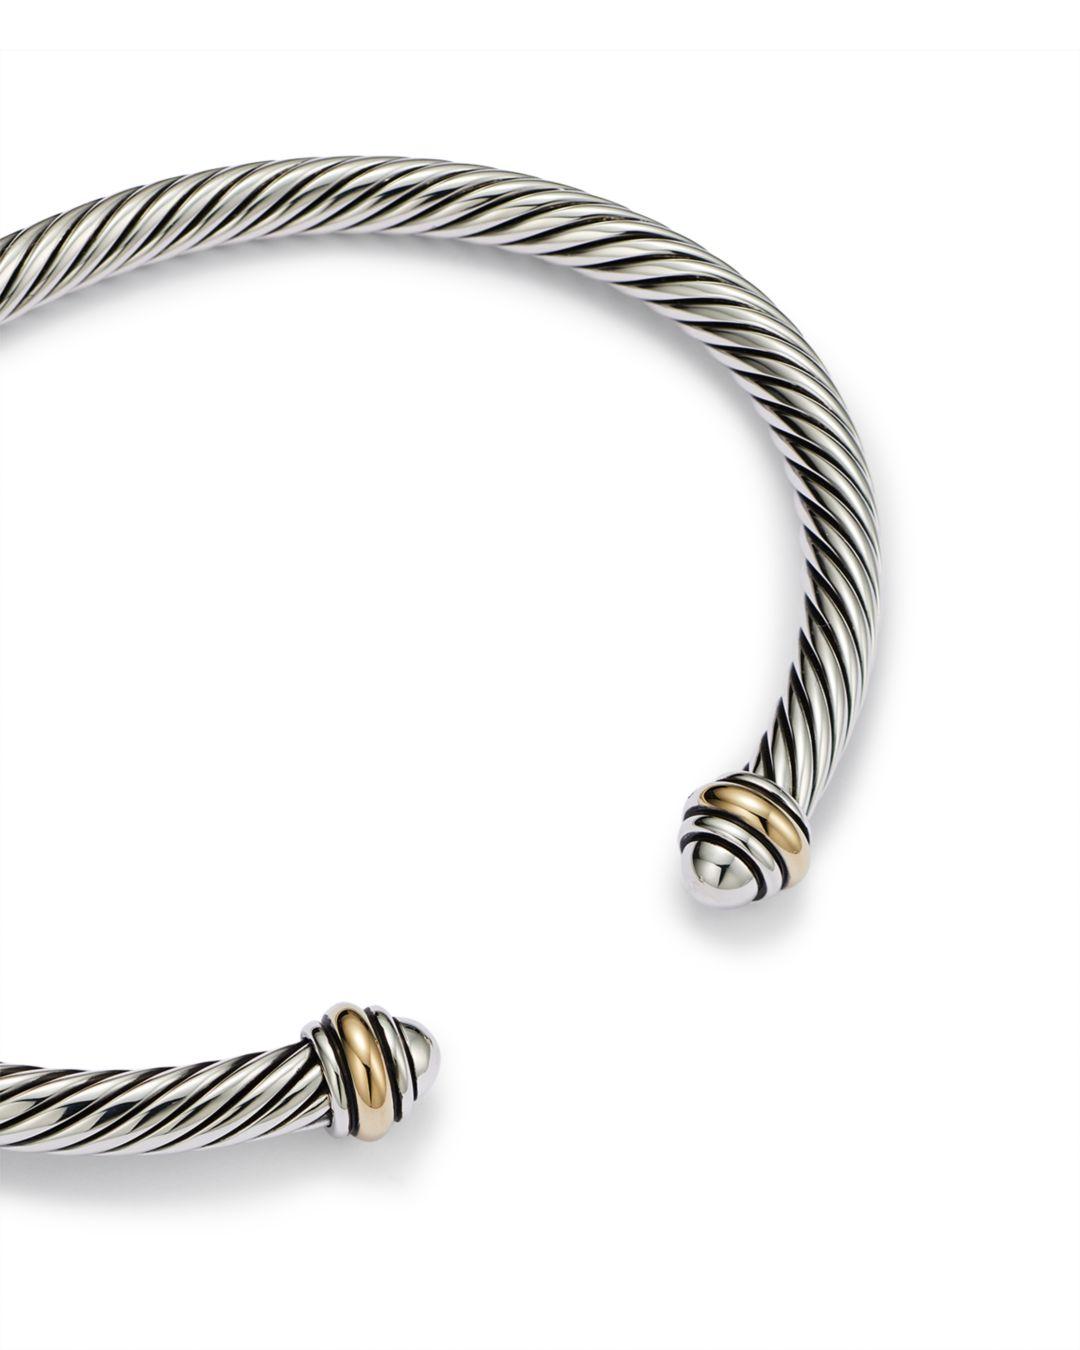 $395 David Yurman Sterling Silver 925 4mm Cable Classics Bracelet with 18K Gold 